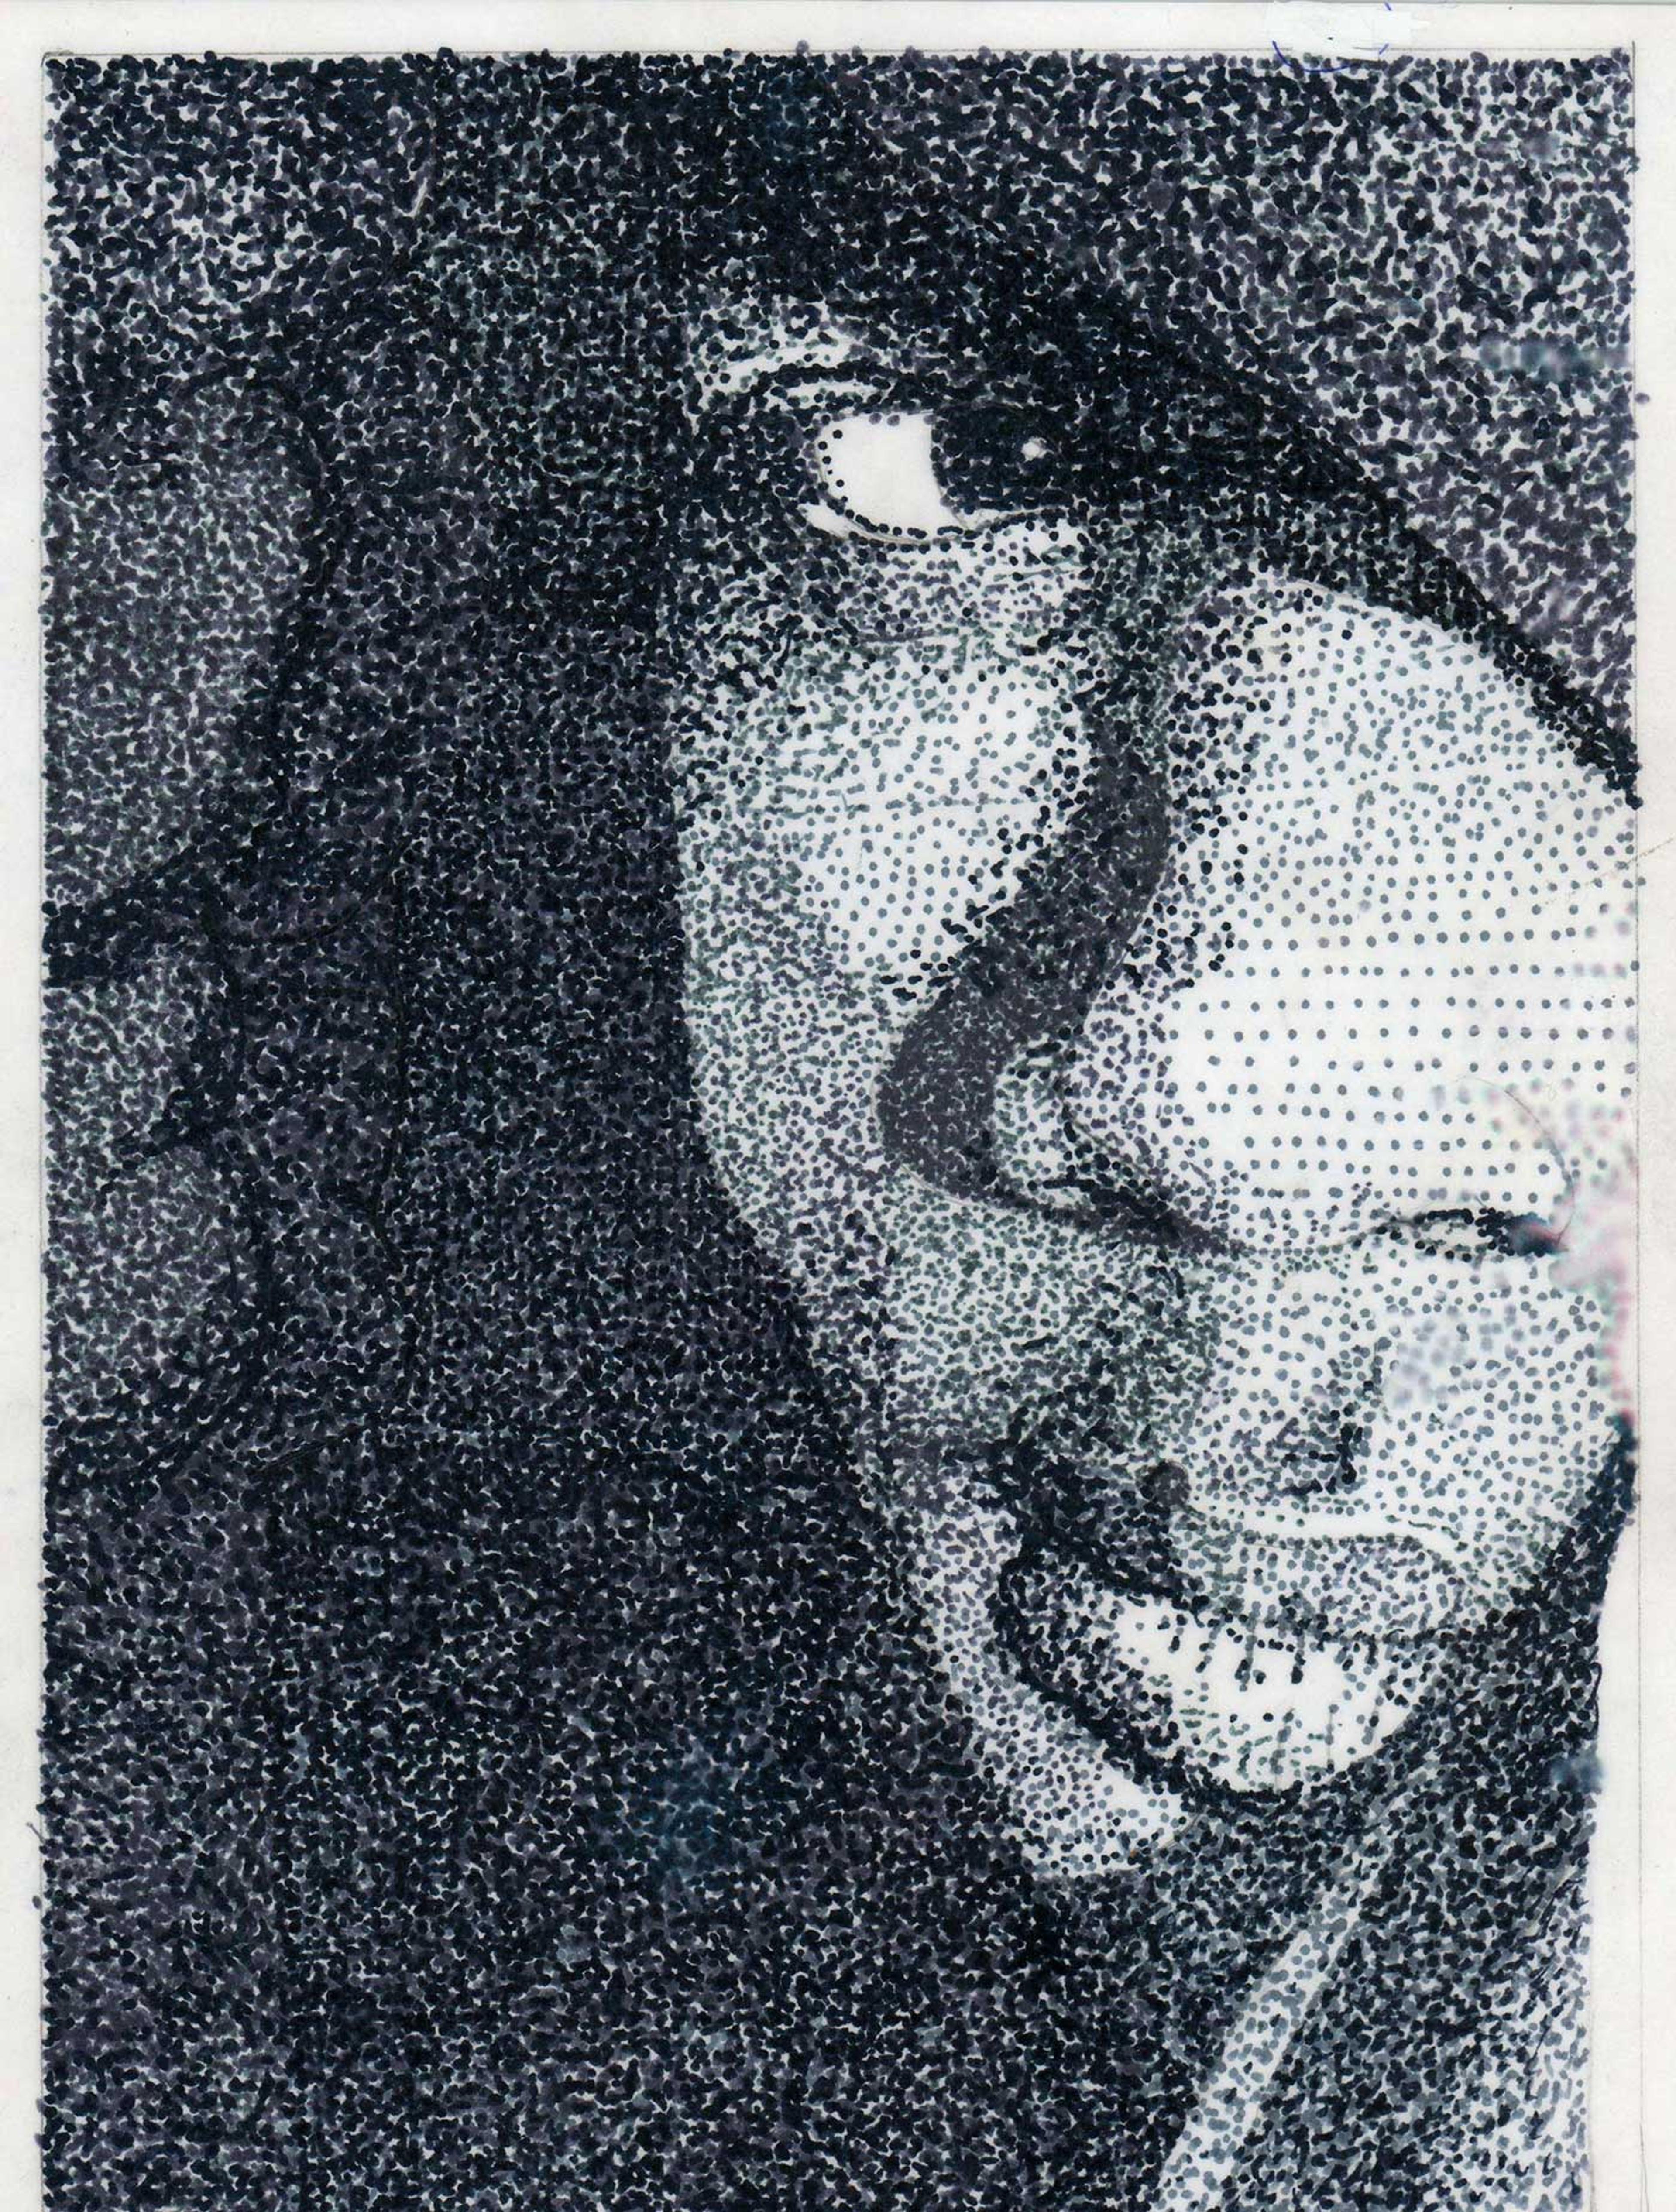 Black and white portrait of a person wearing a hood.